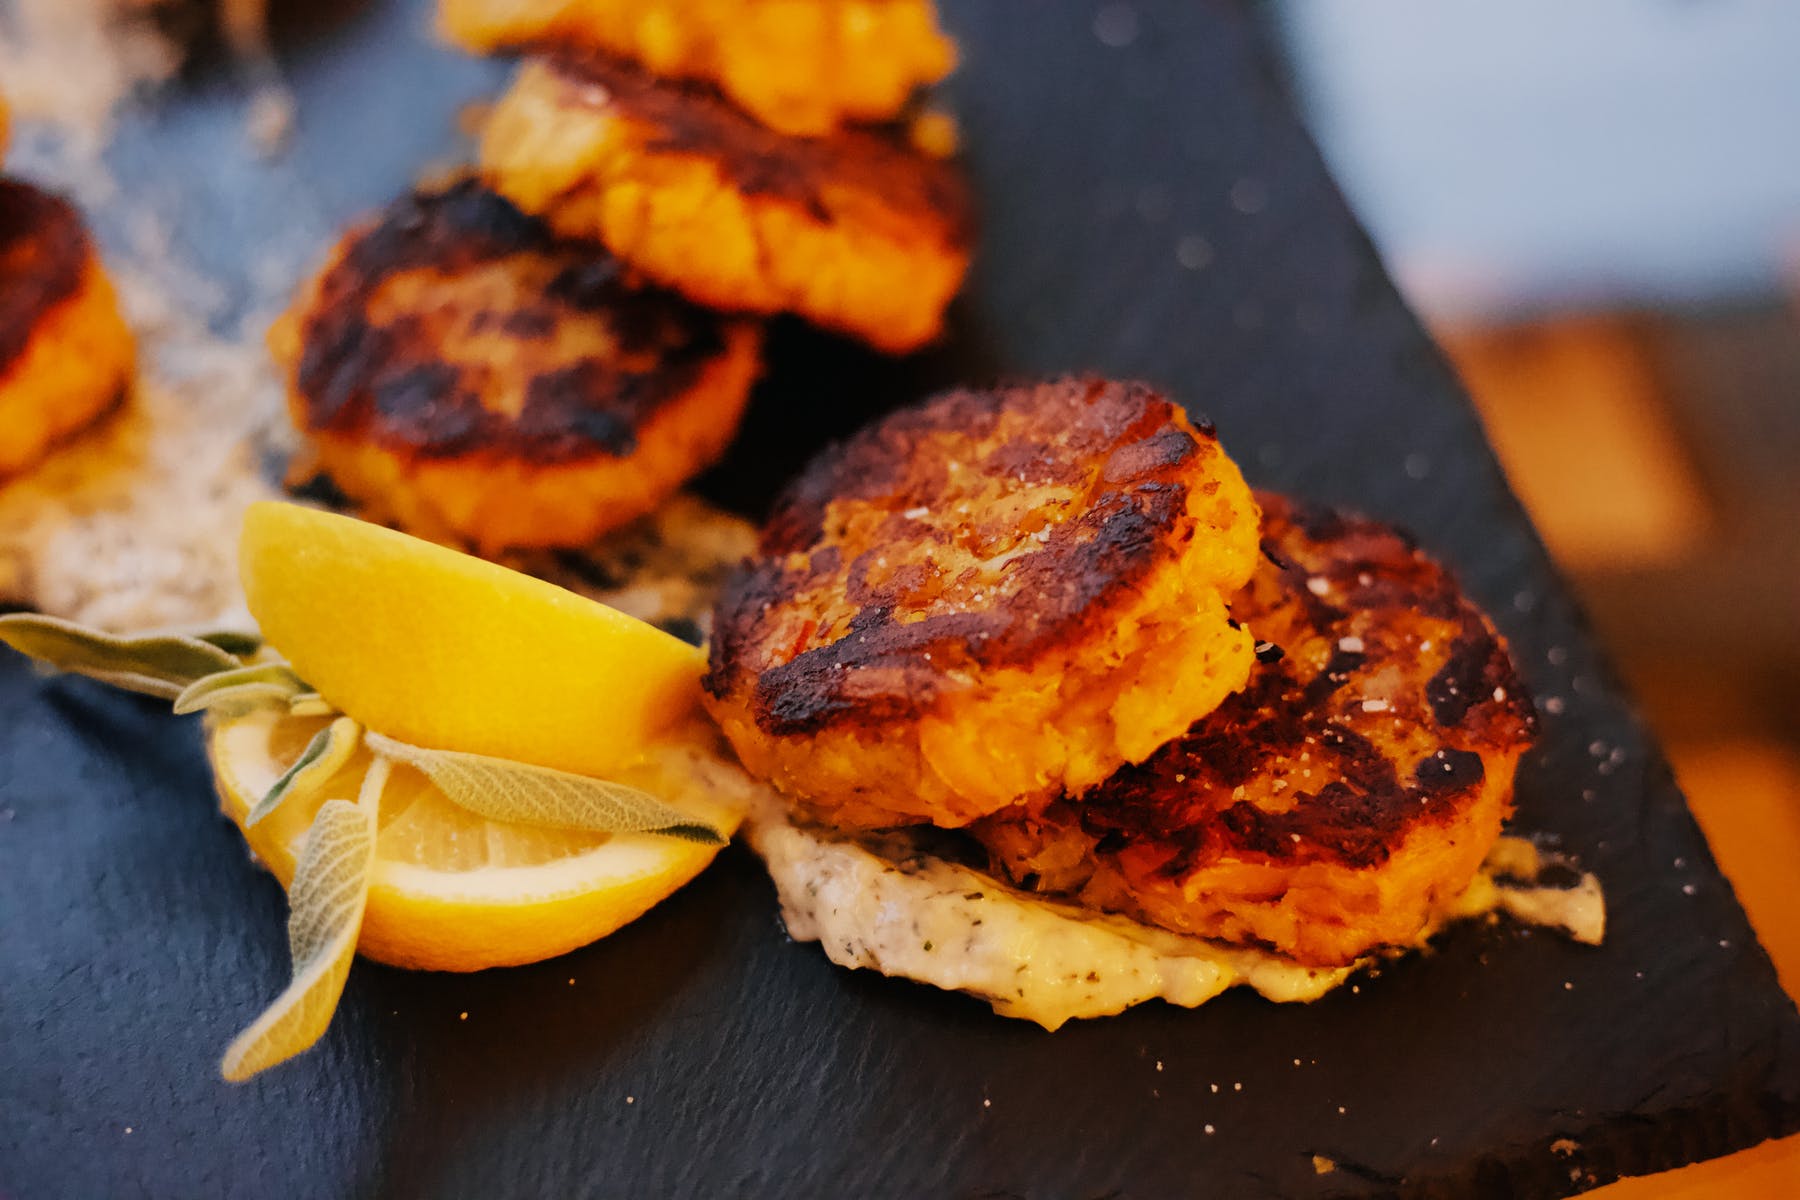 Butternut Squash and Jonah Crab Cakes With Roasted Garlic Purée